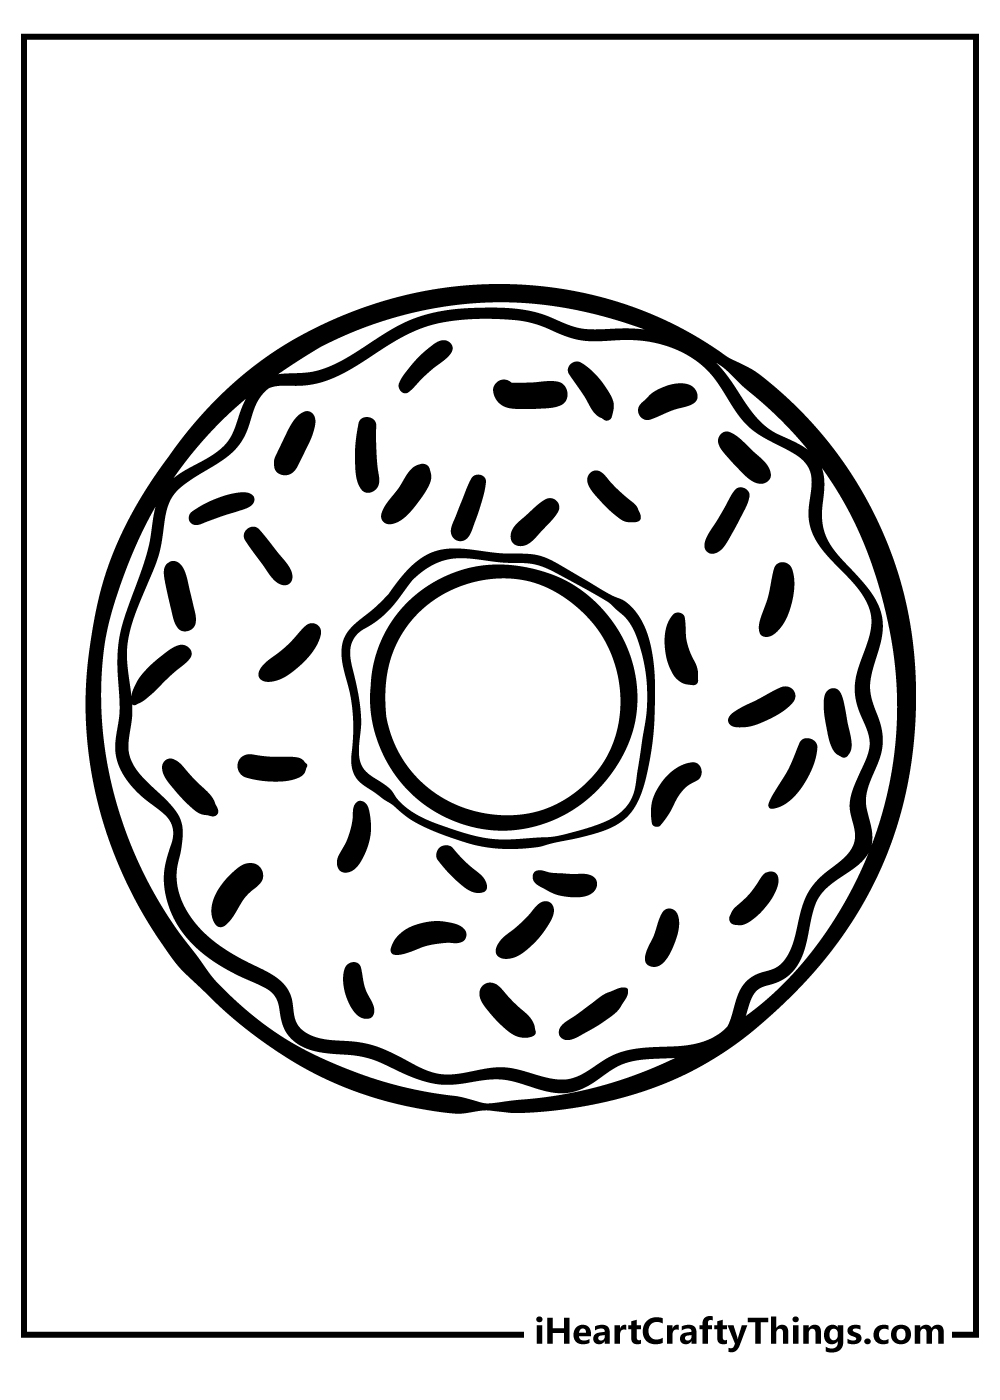 Donut Coloring Book for adults free download